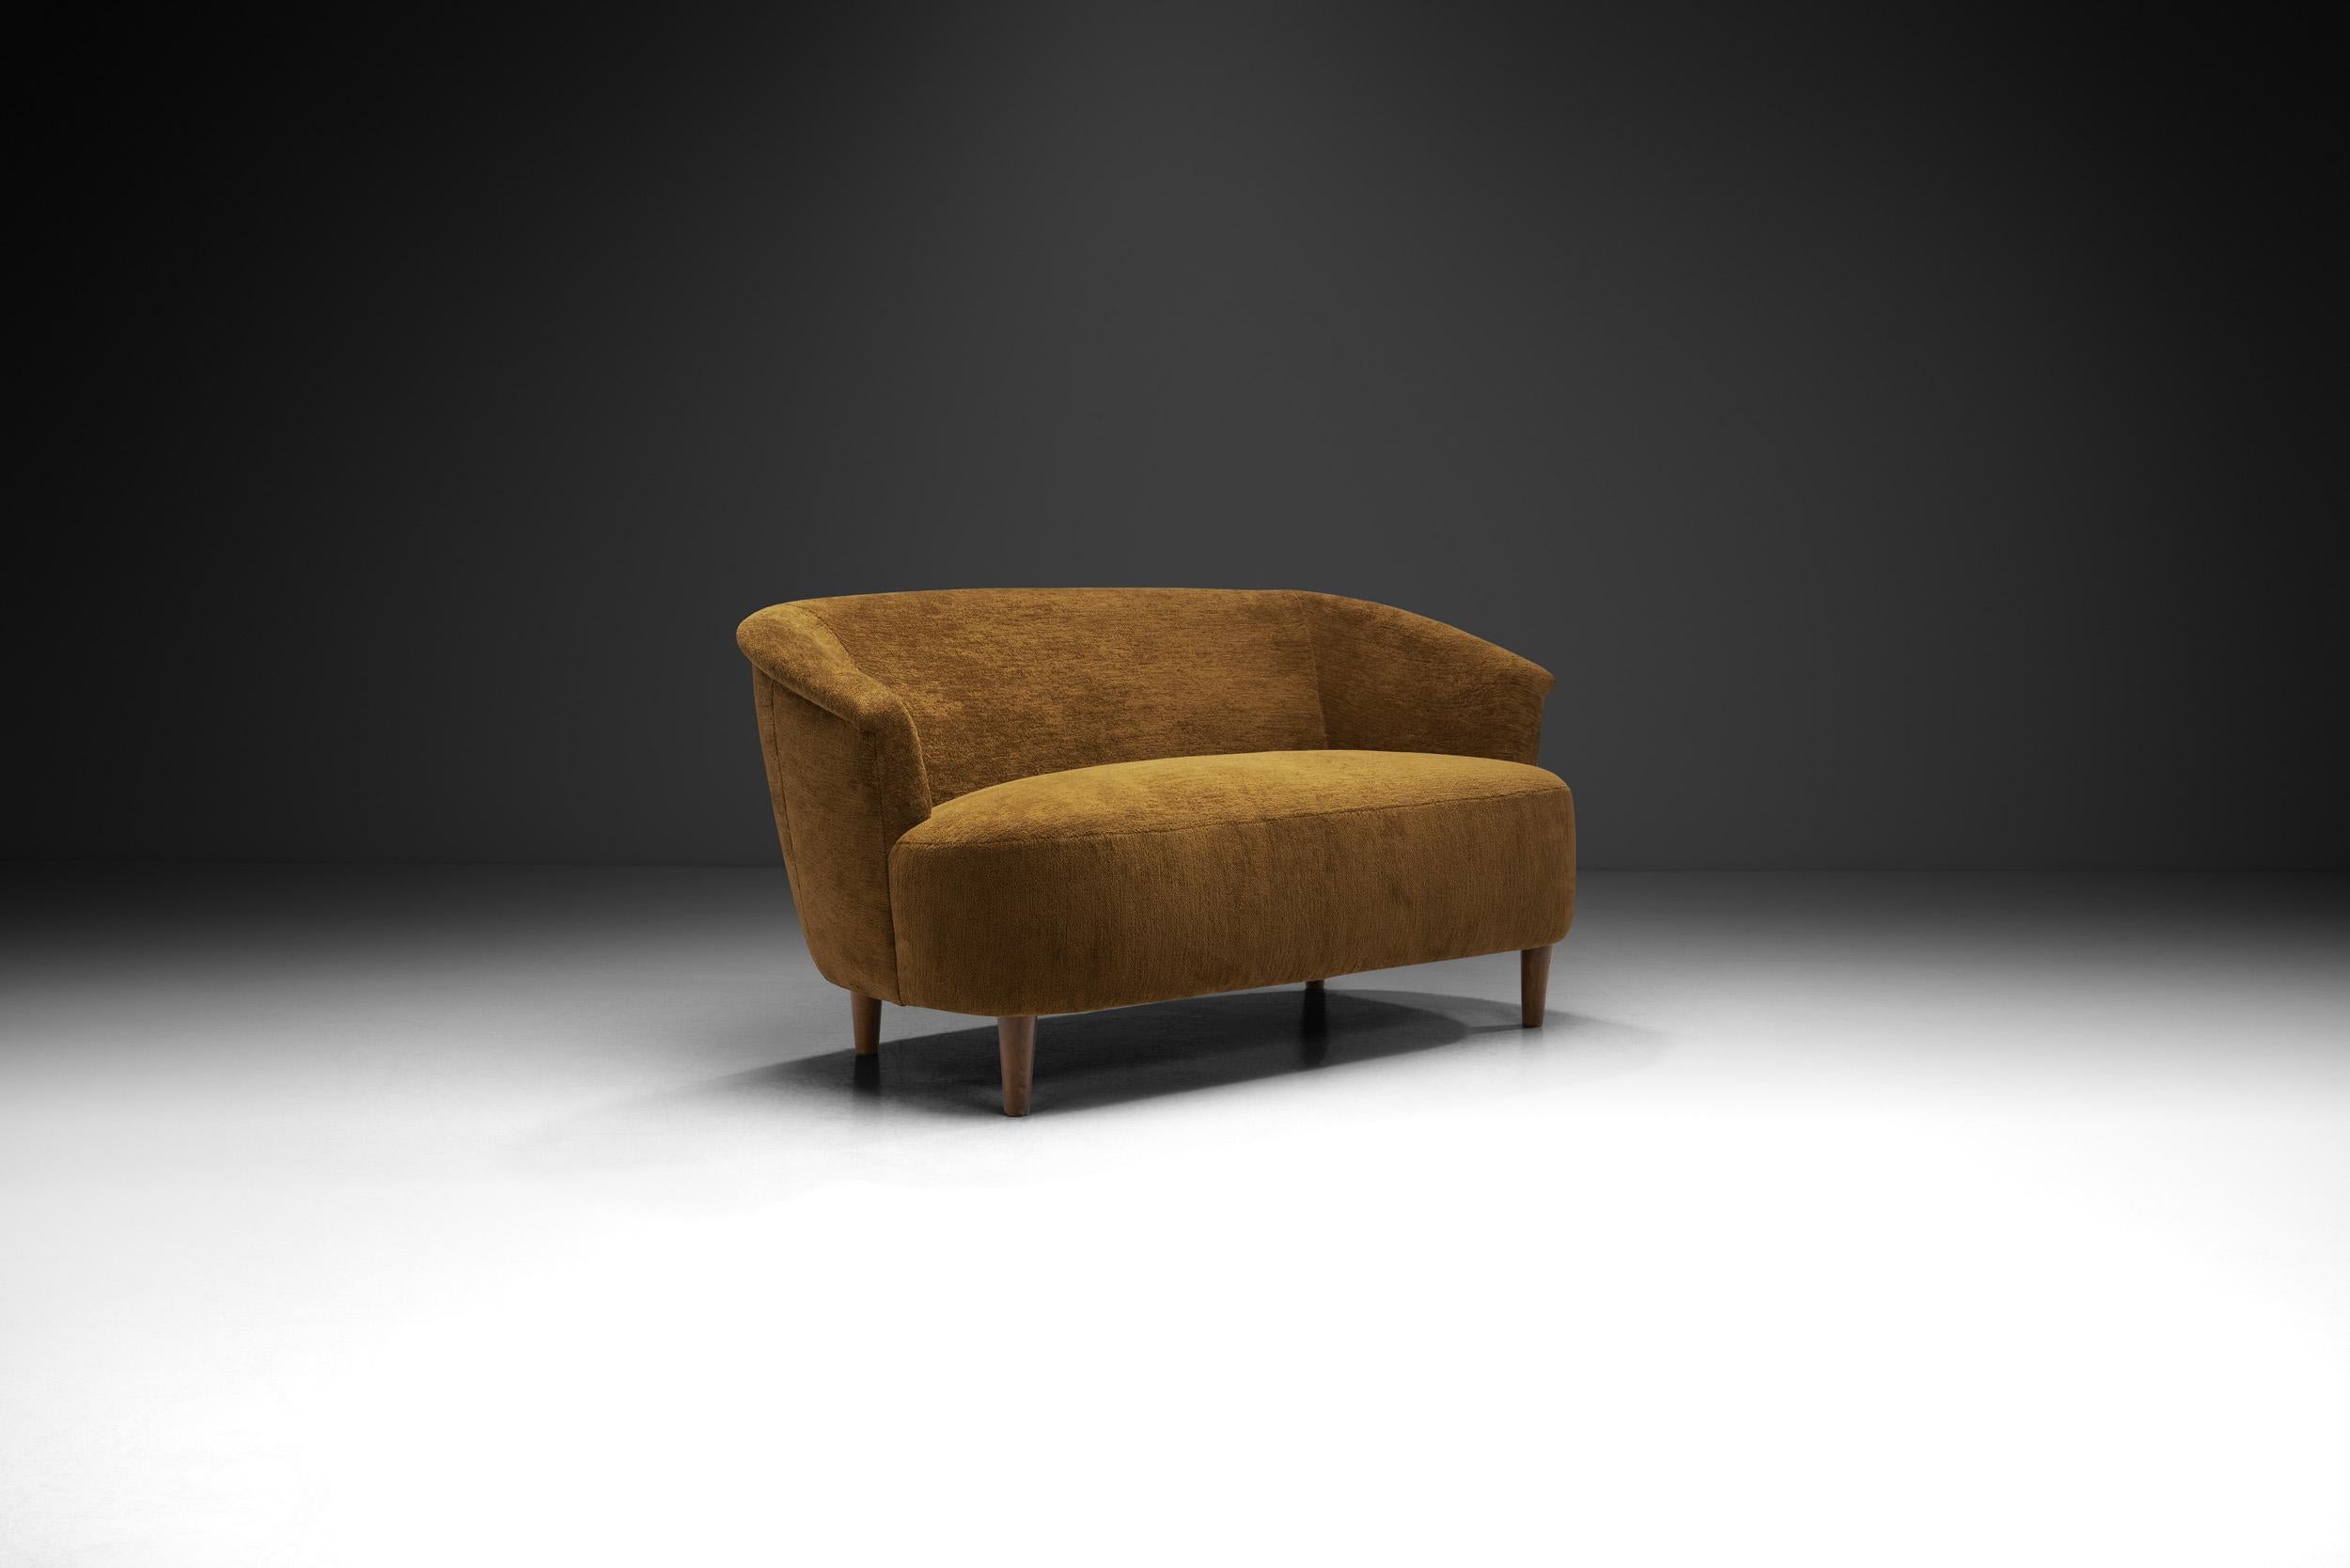 This Carl Malmsten sofa is called exactly what ABBA was called before they changed their name: Fästfolket. In the past, an engaged couple were often referred to as 'fixed people' in Sweden.

This type of sofa is often referred to as a loveseat,